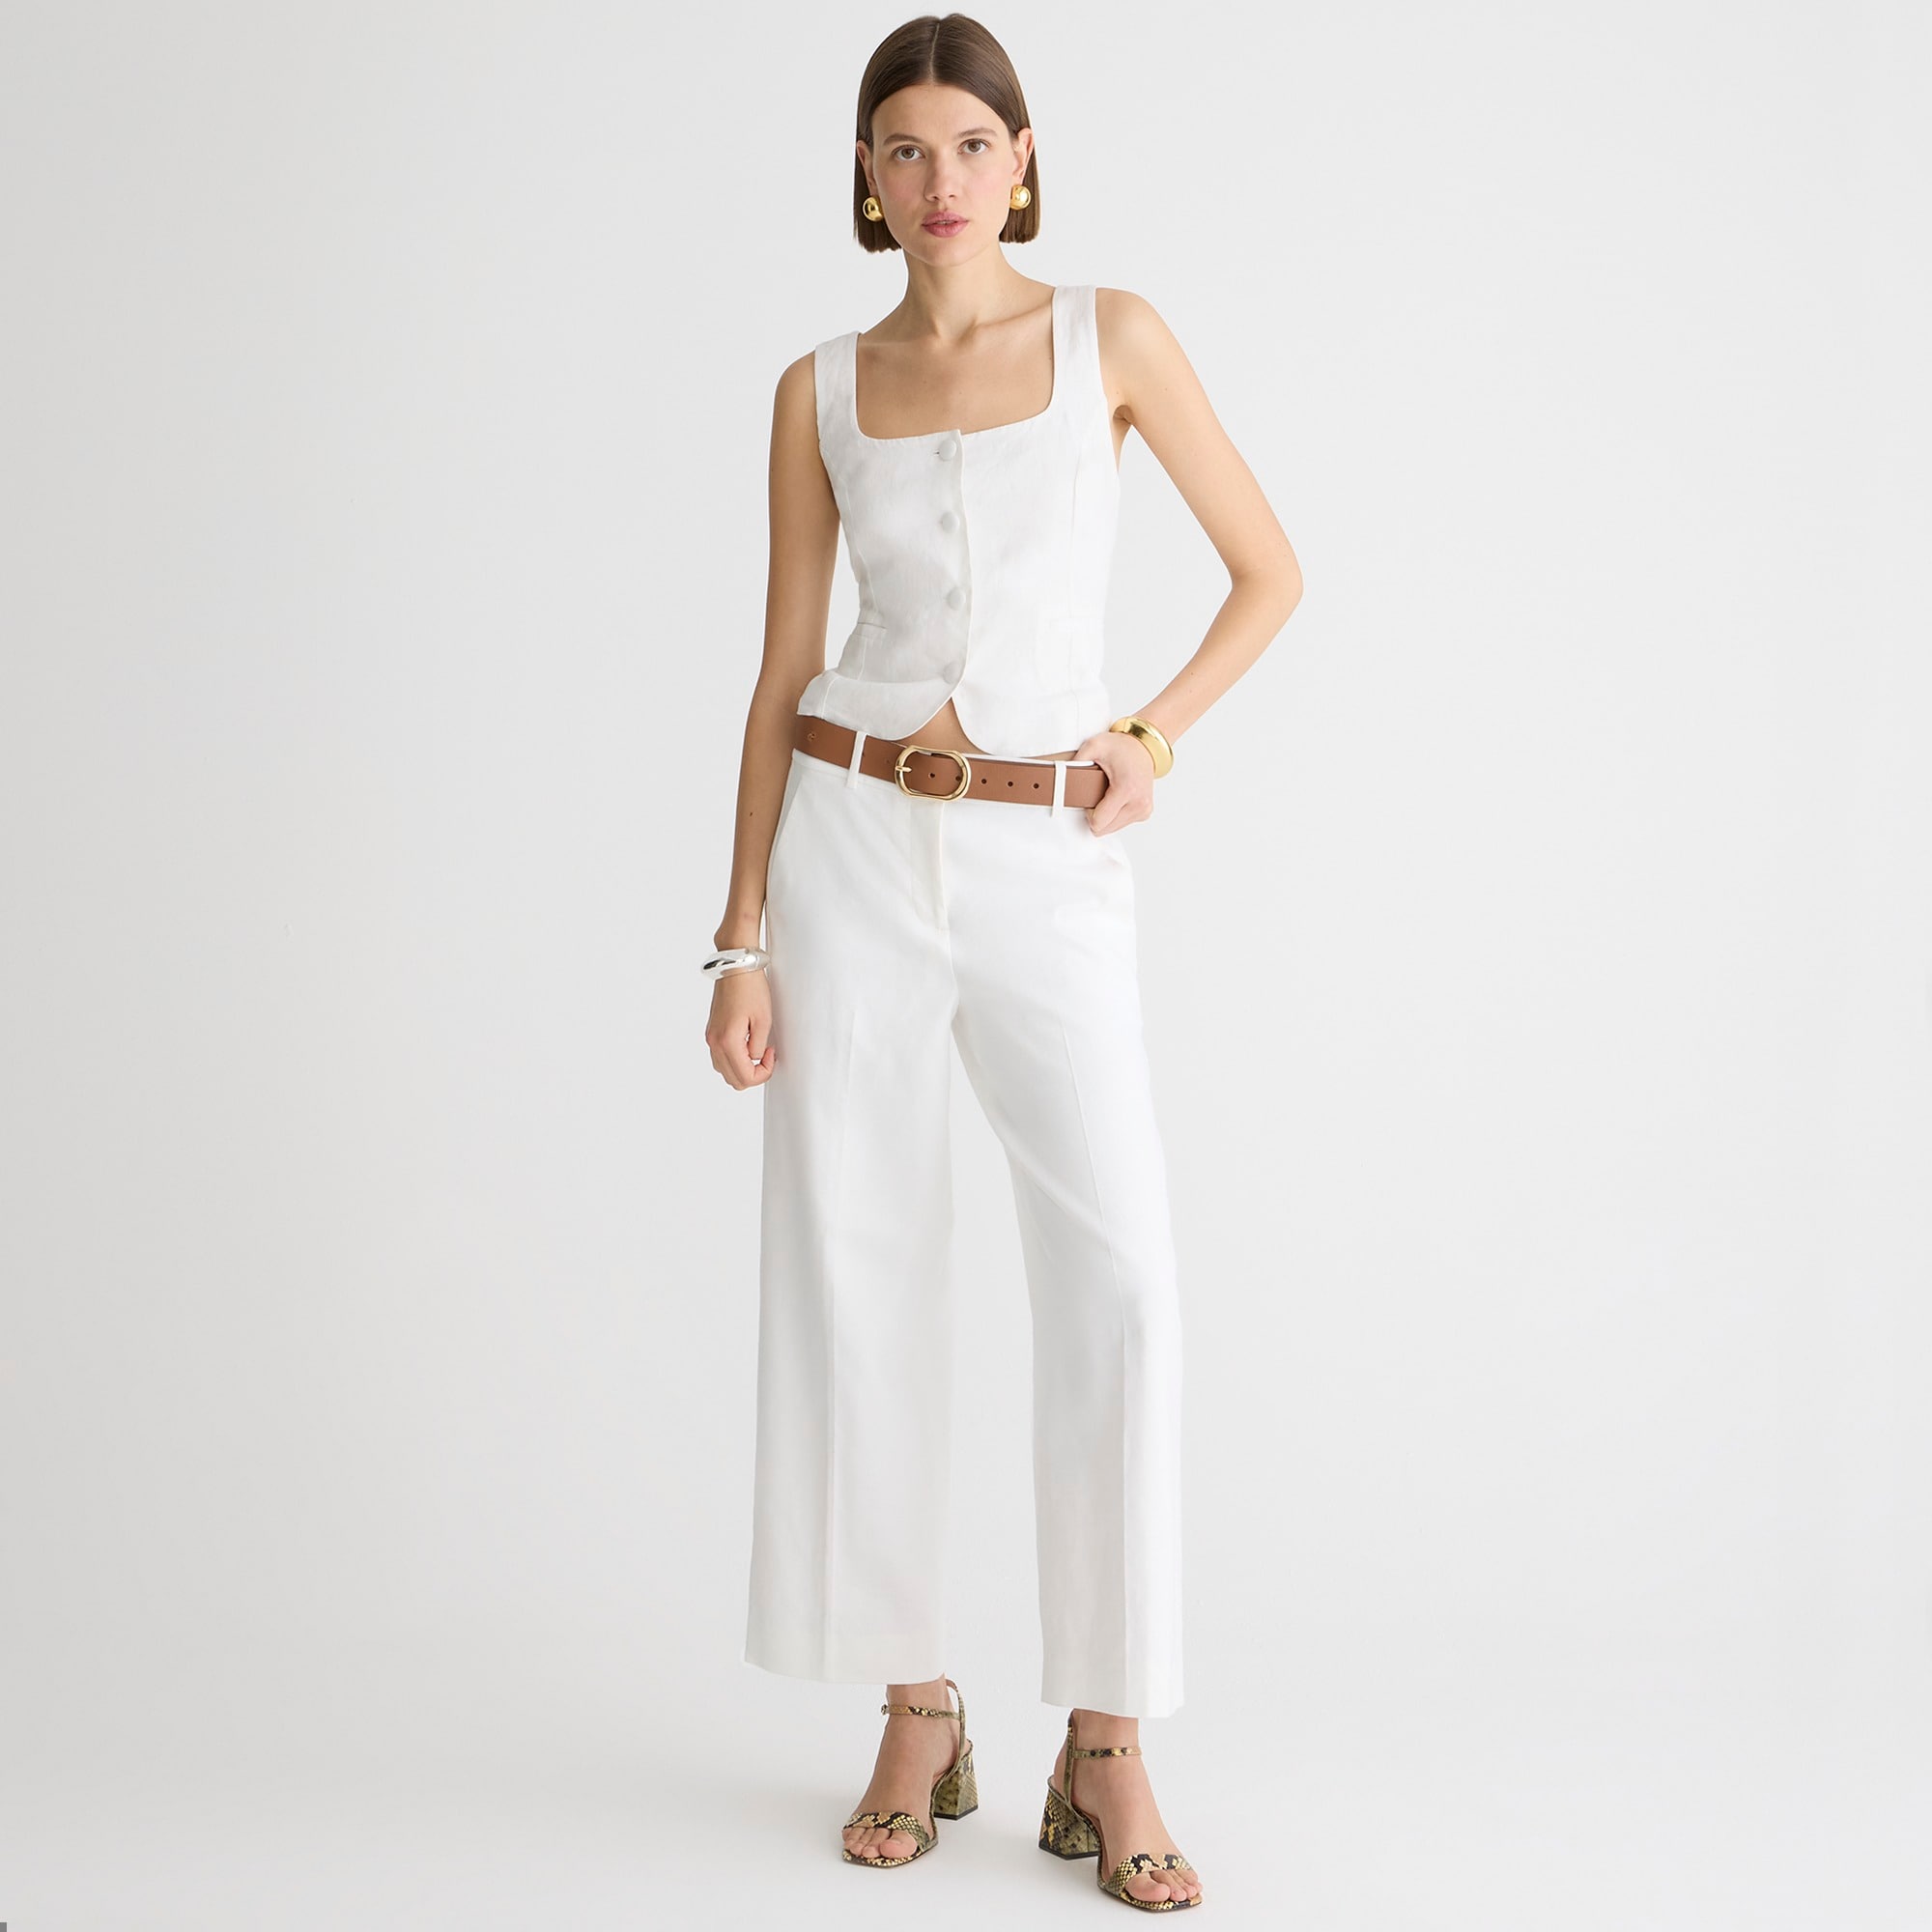  Tall Sydney pant in stretch linen blend